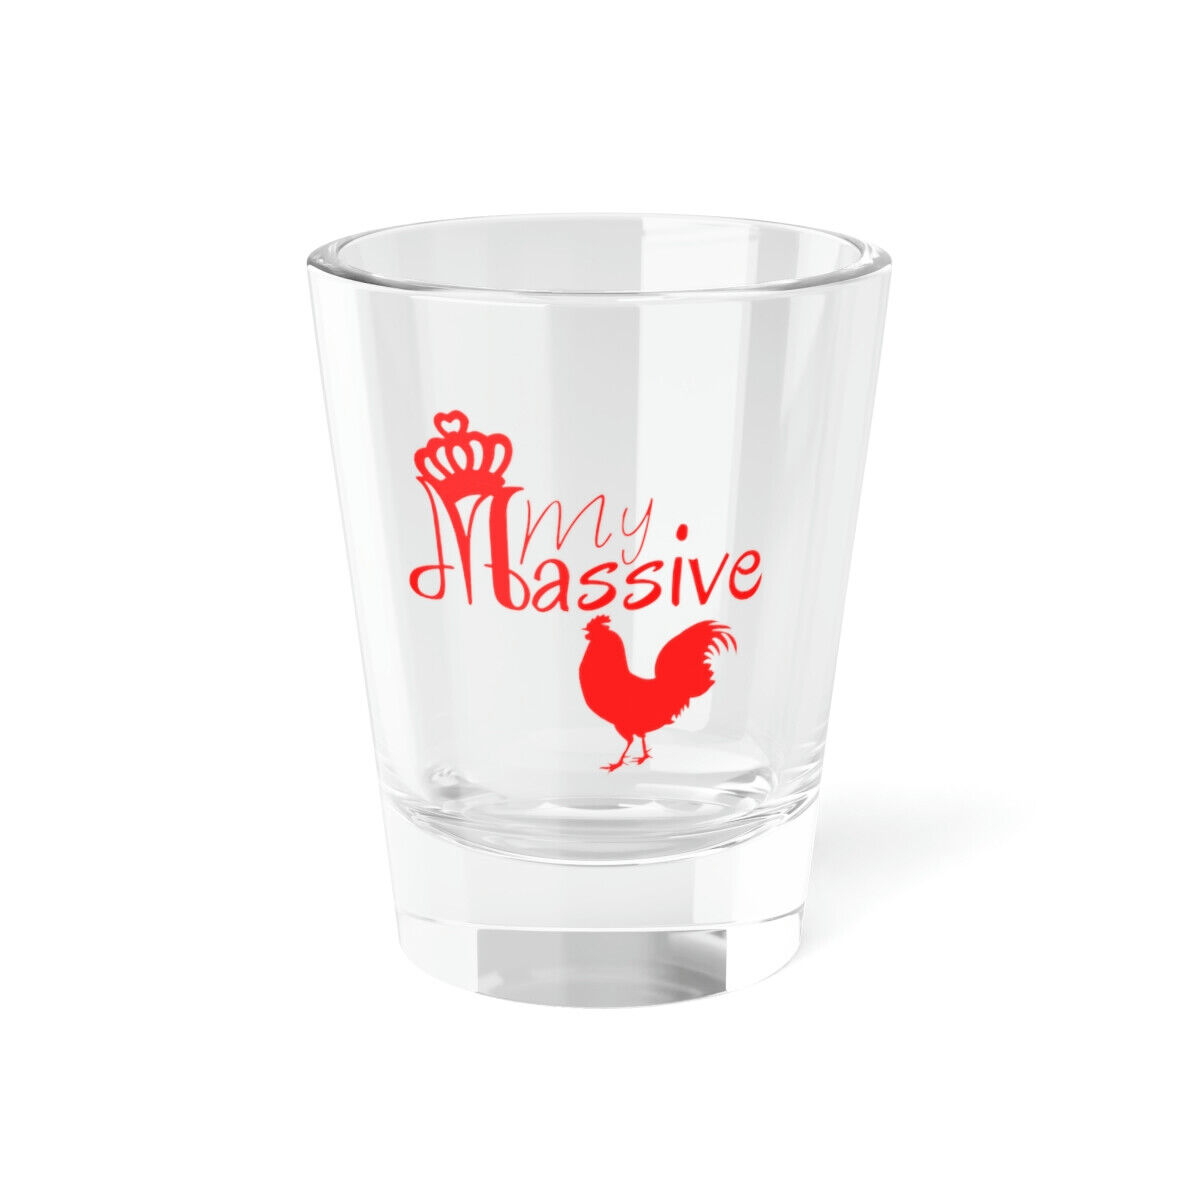 Funny My Massive you know what Shot Glass - Great Gift Idea